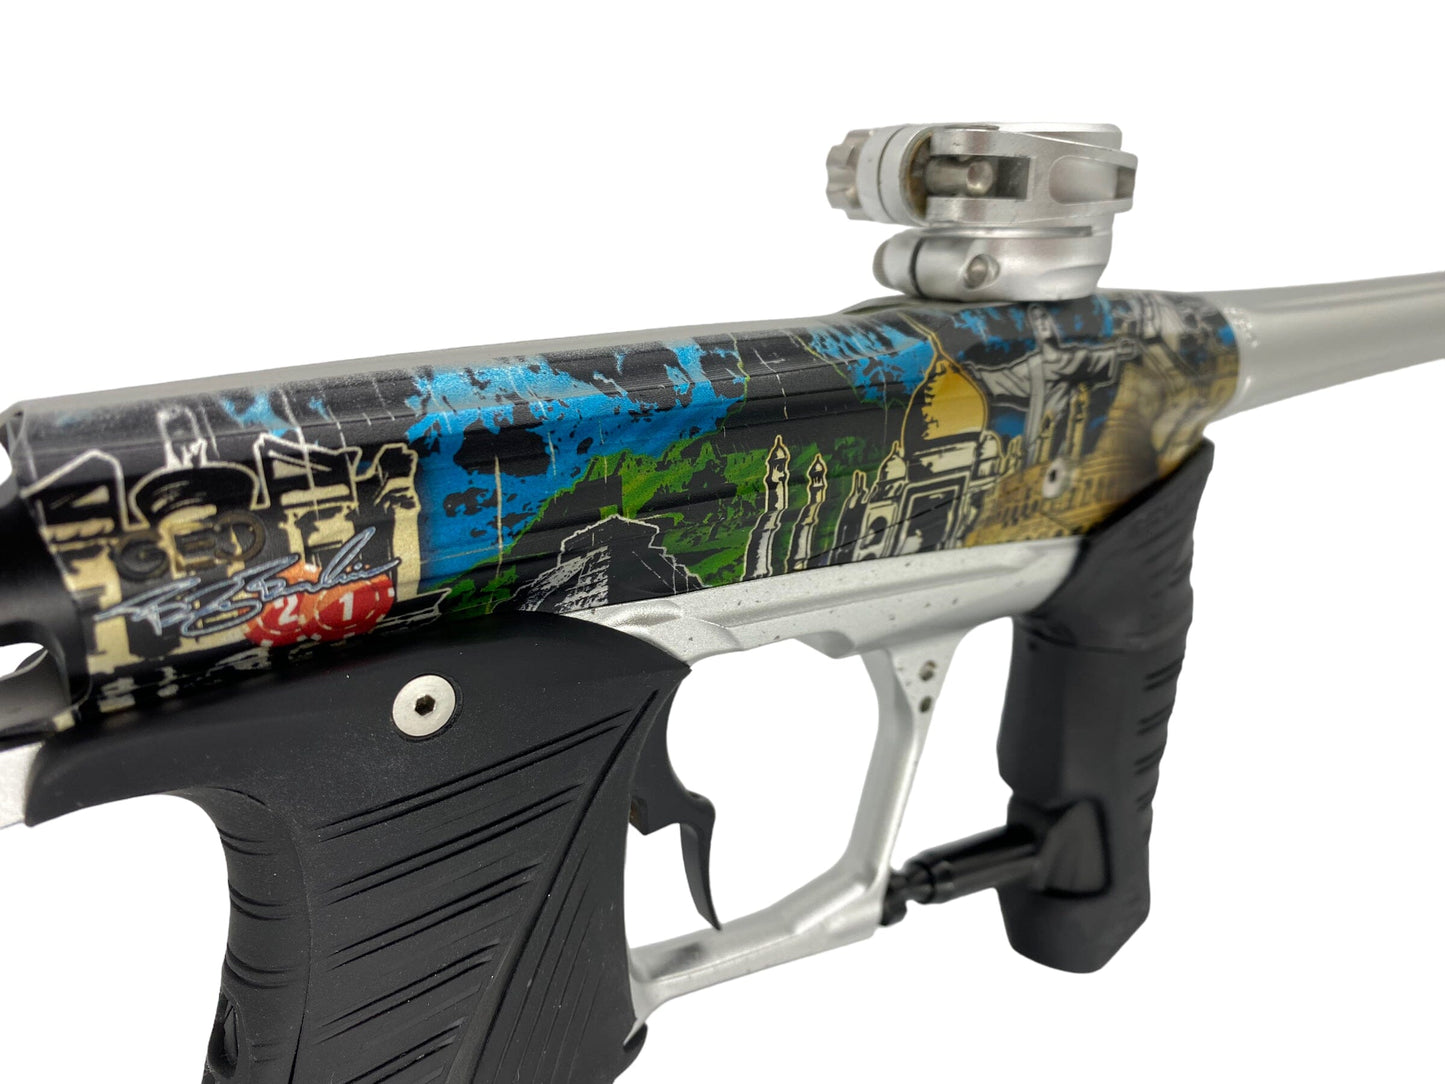 Used Planet Eclipse Geo 3.1 Billy Bernacchia's Custom Pro Edition Paintball Gun from CPXBrosPaintball Buy/Sell/Trade Paintball Markers, Paintball Hoppers, Paintball Masks, and Hormesis Headbands